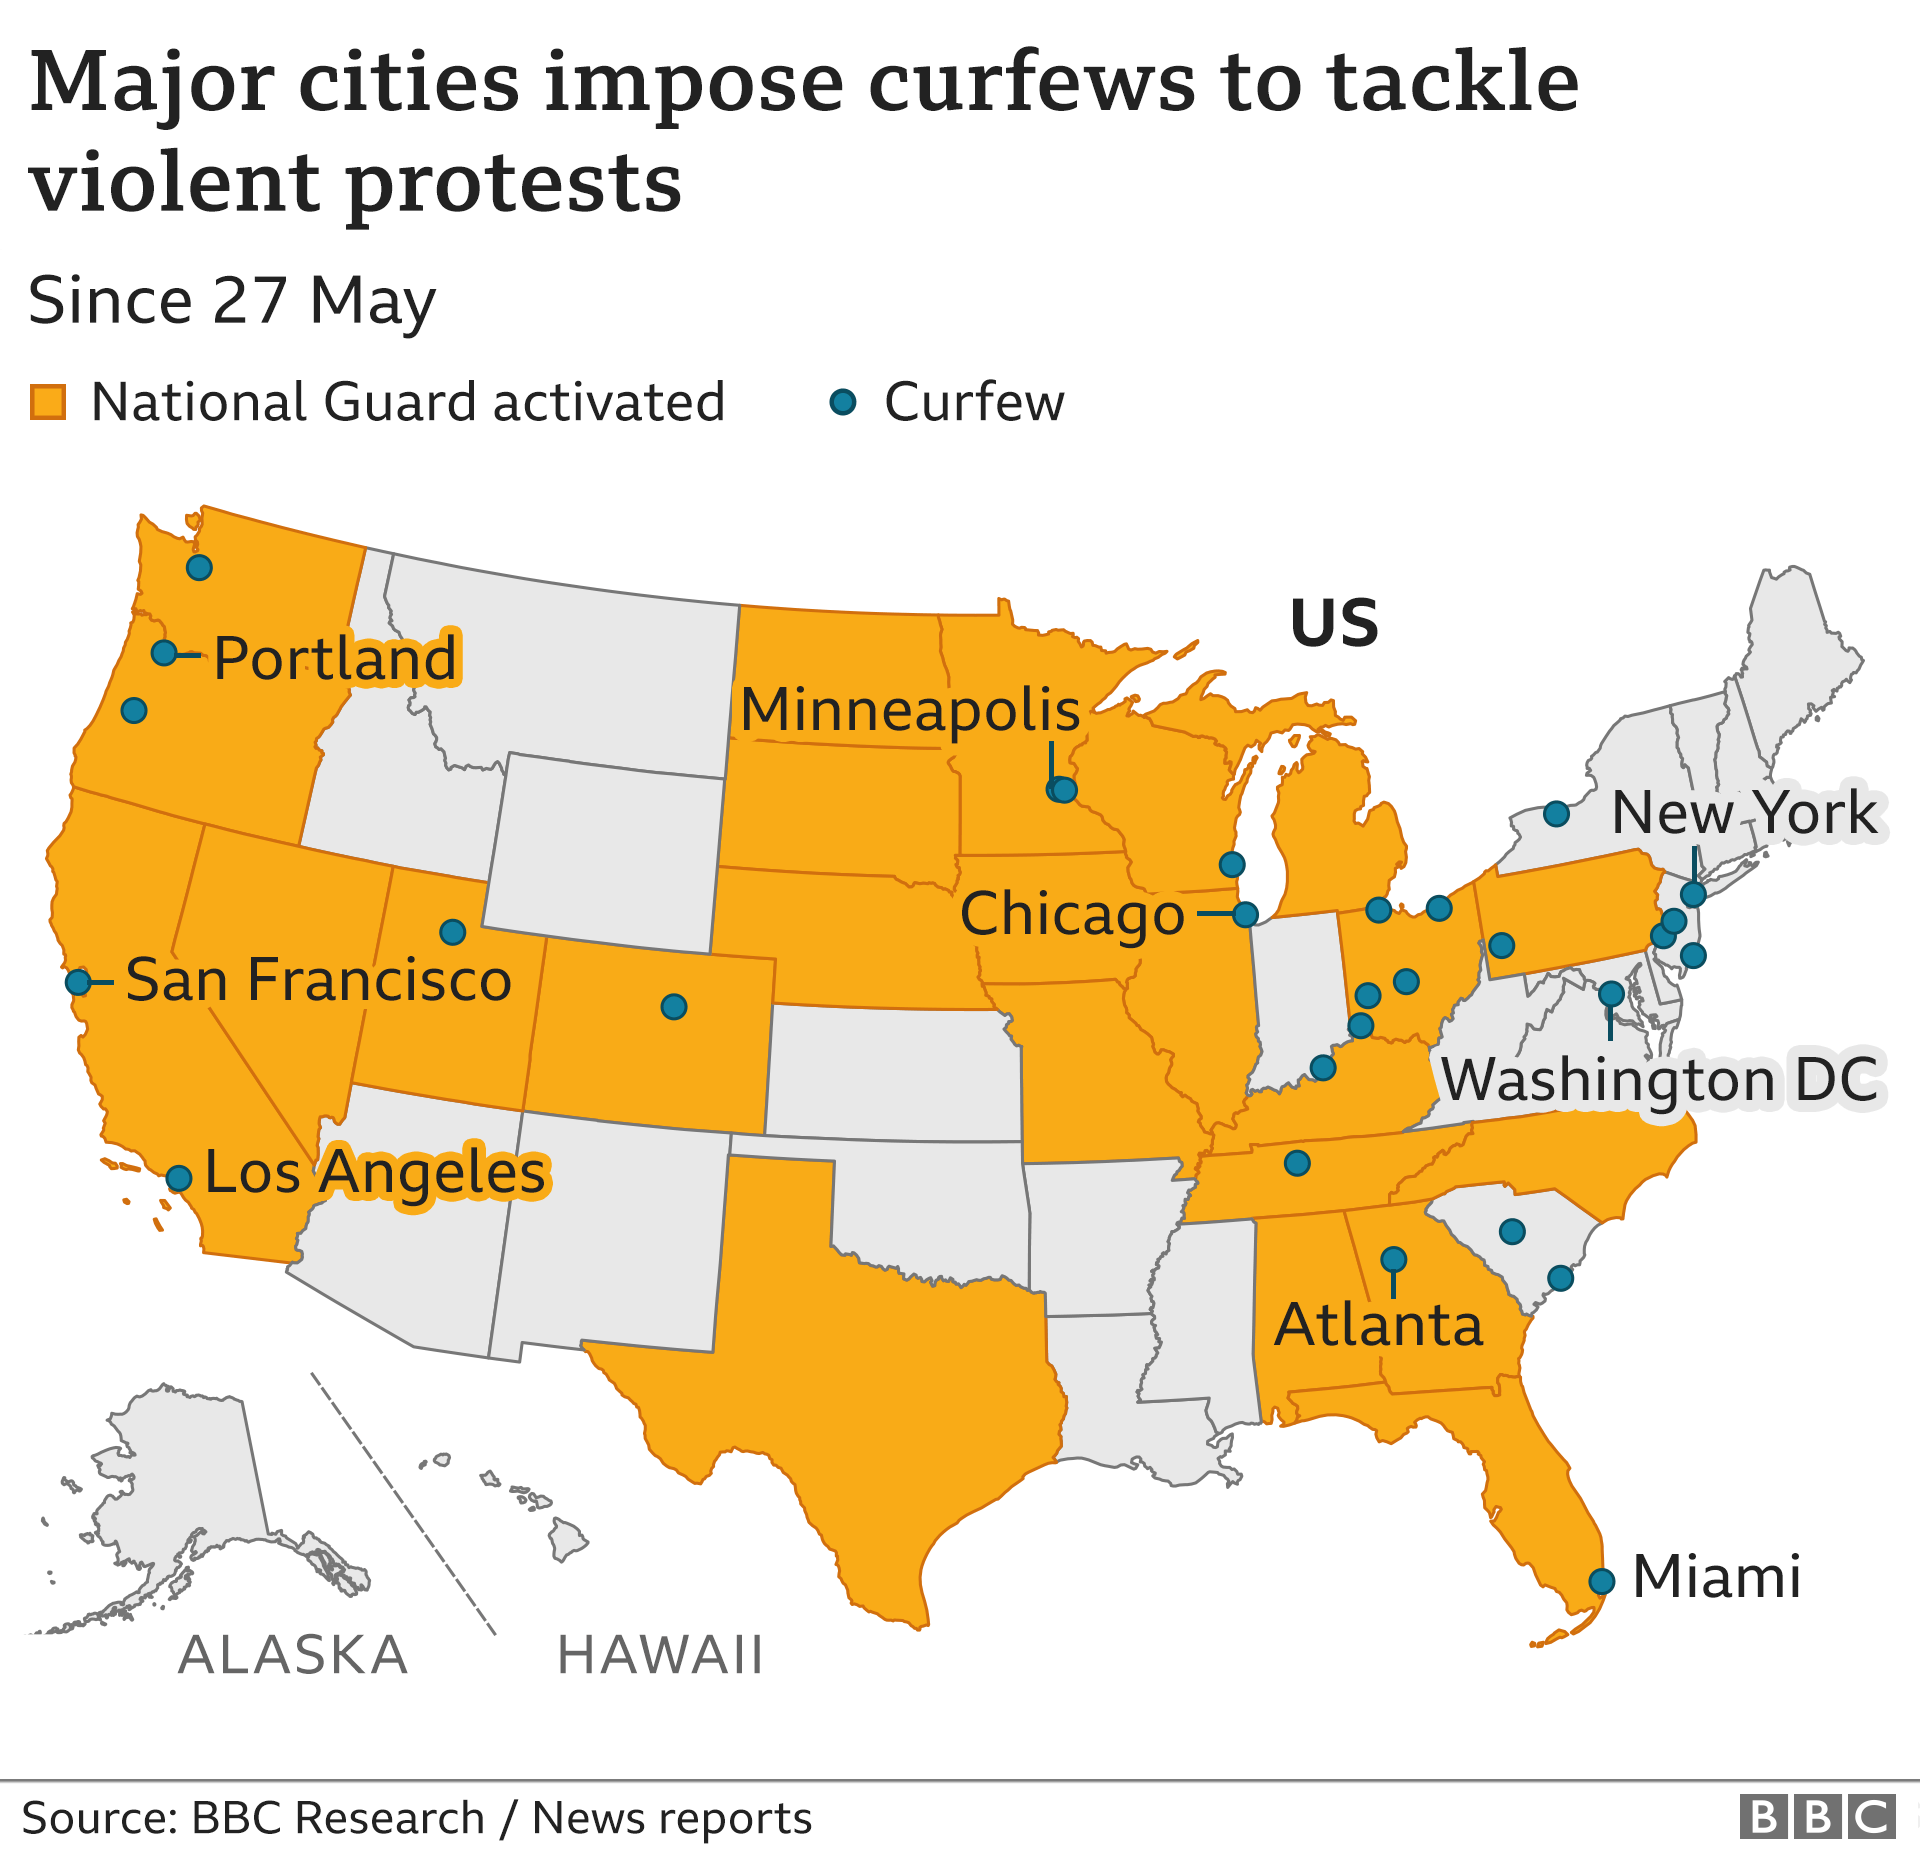 Map of major cities that have imposed curfews to tackle violent protests